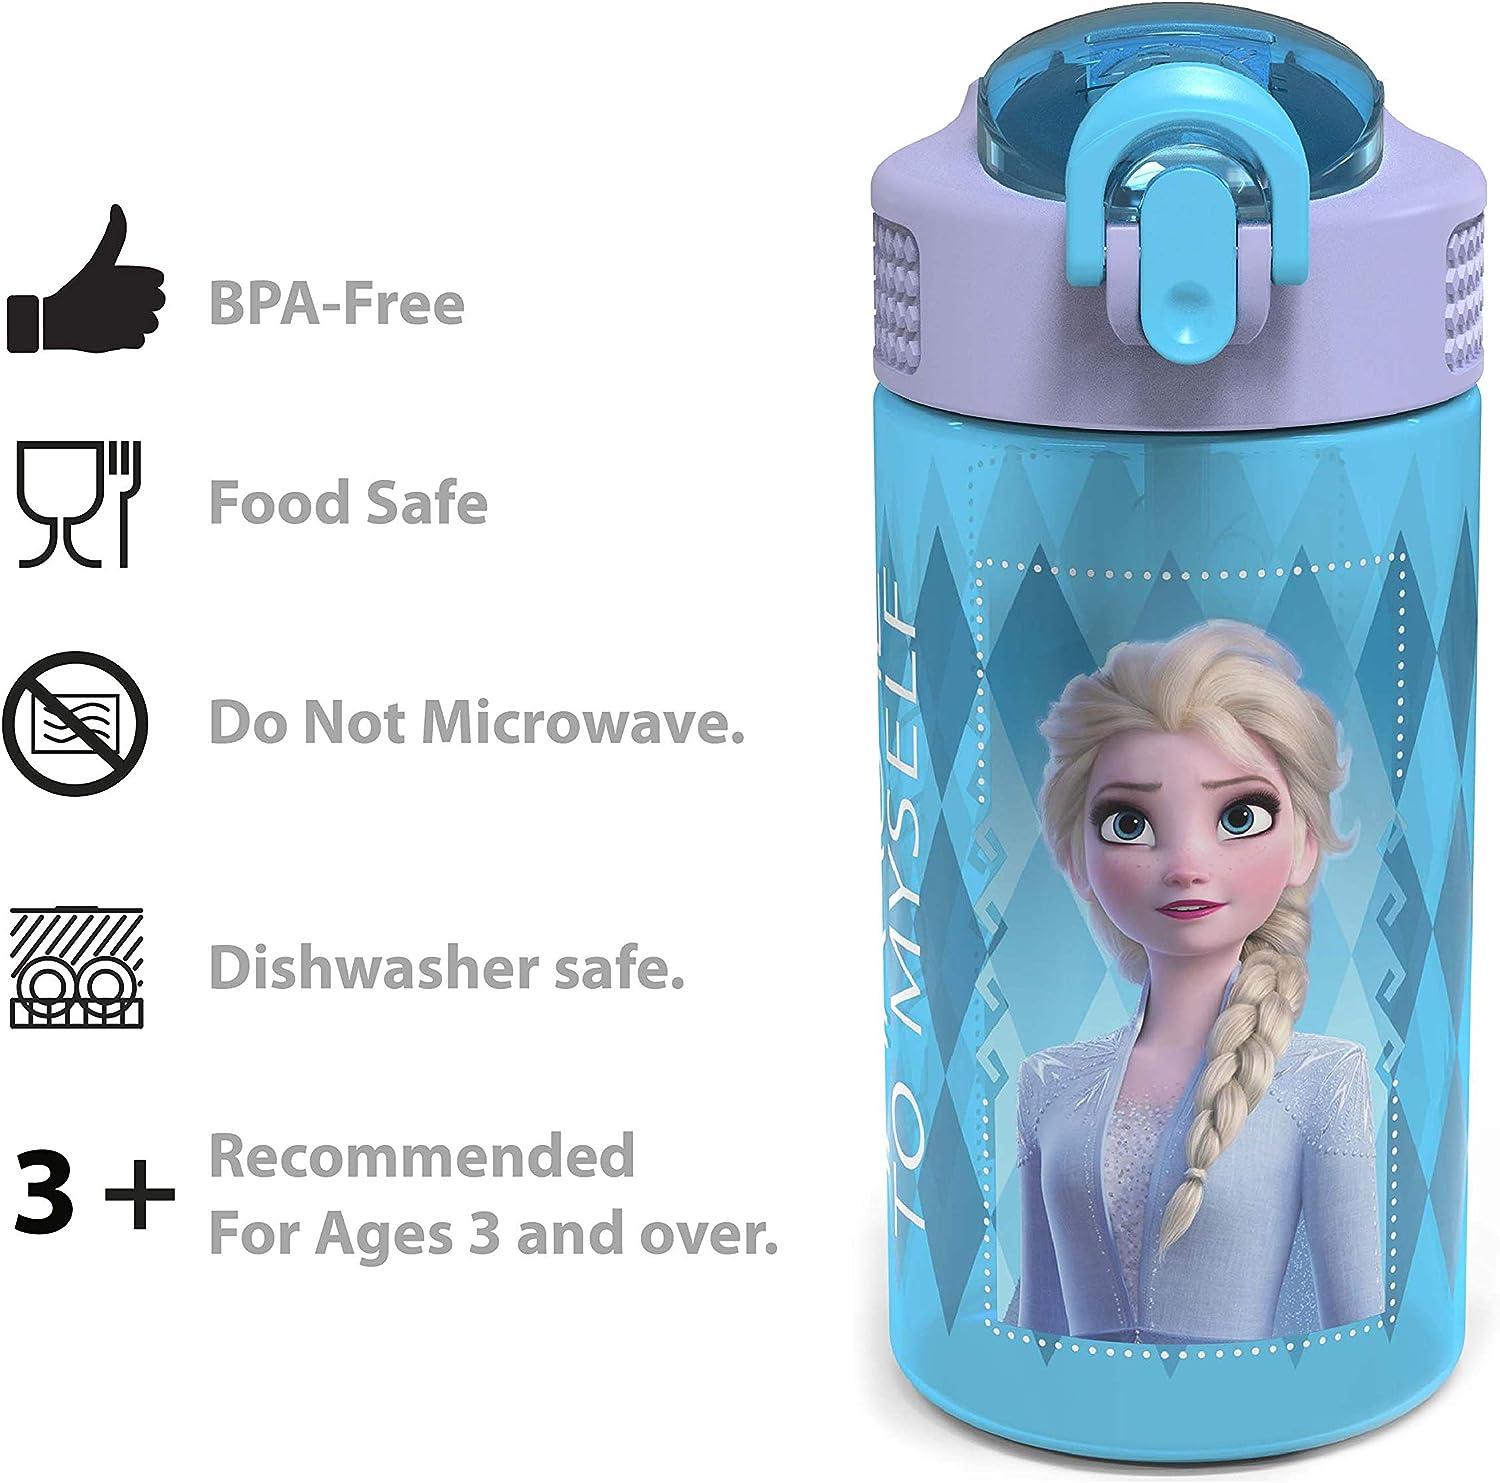 Zak Designs 16 oz Blue and Purple Anna and Elsa Plastic Water Bottles with Flip-Top Lid (2 Pack)